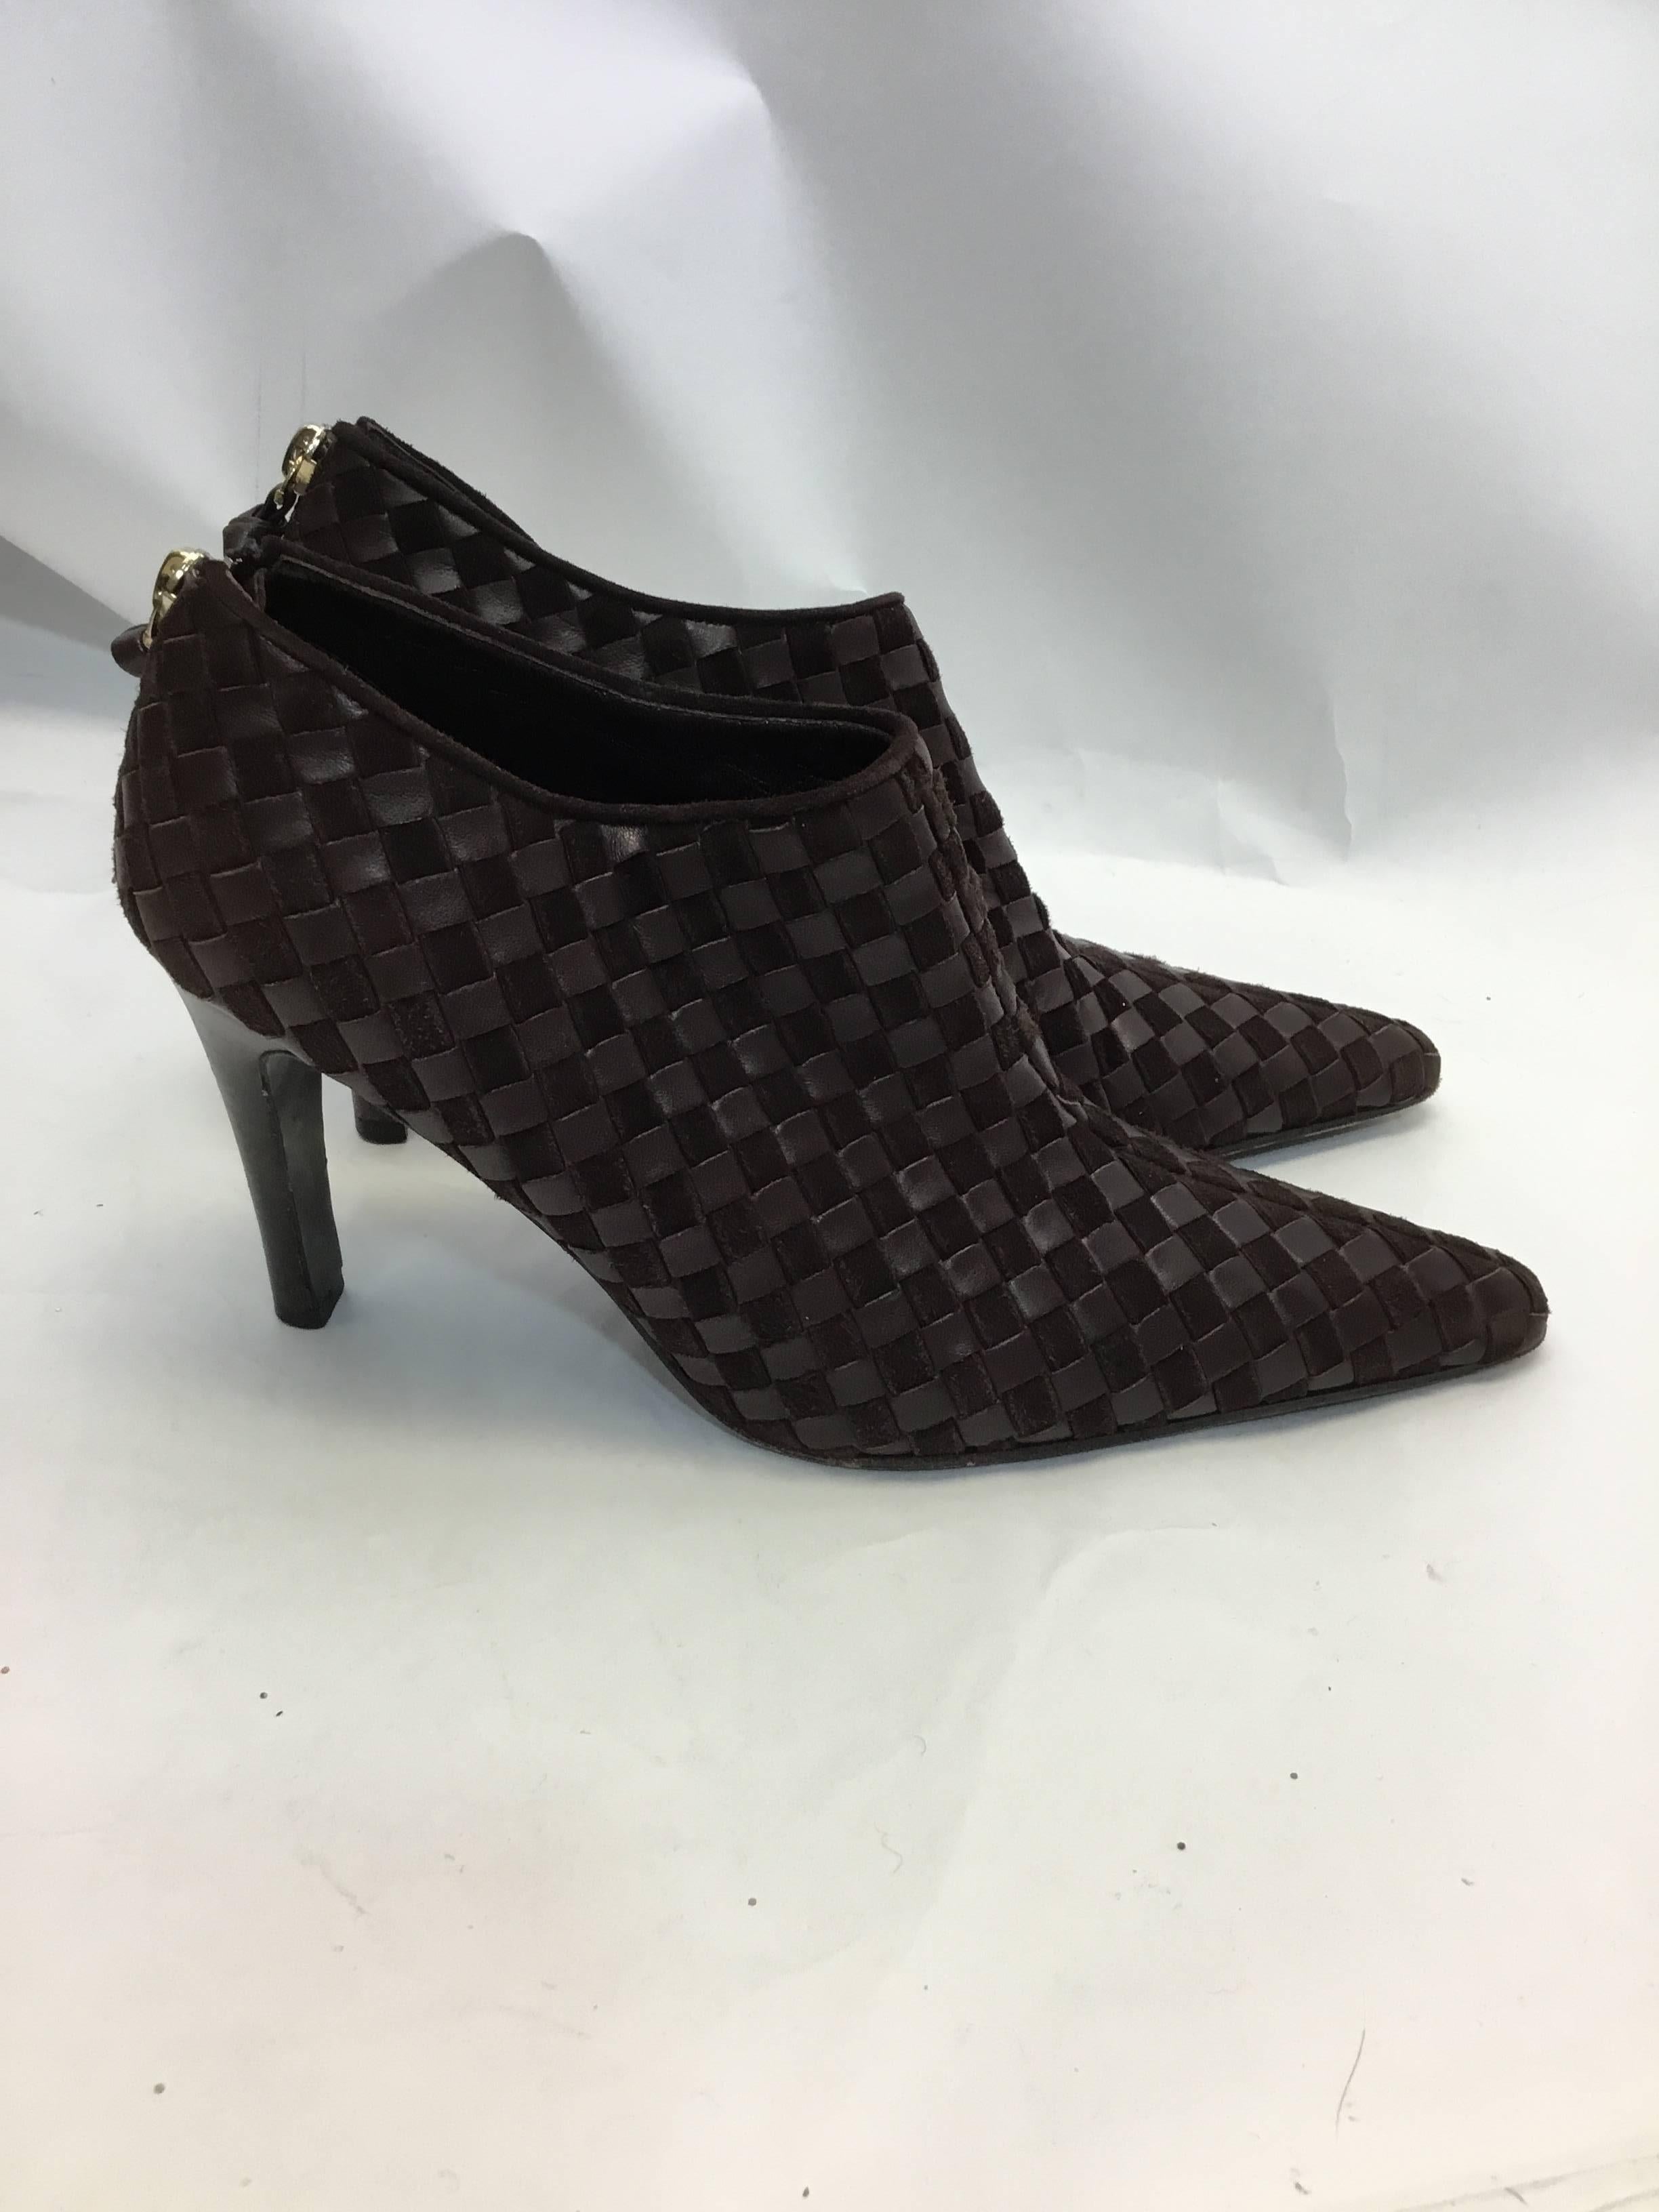 Bottega Veneta Brown Leather Ankle Booties In Excellent Condition For Sale In Narberth, PA